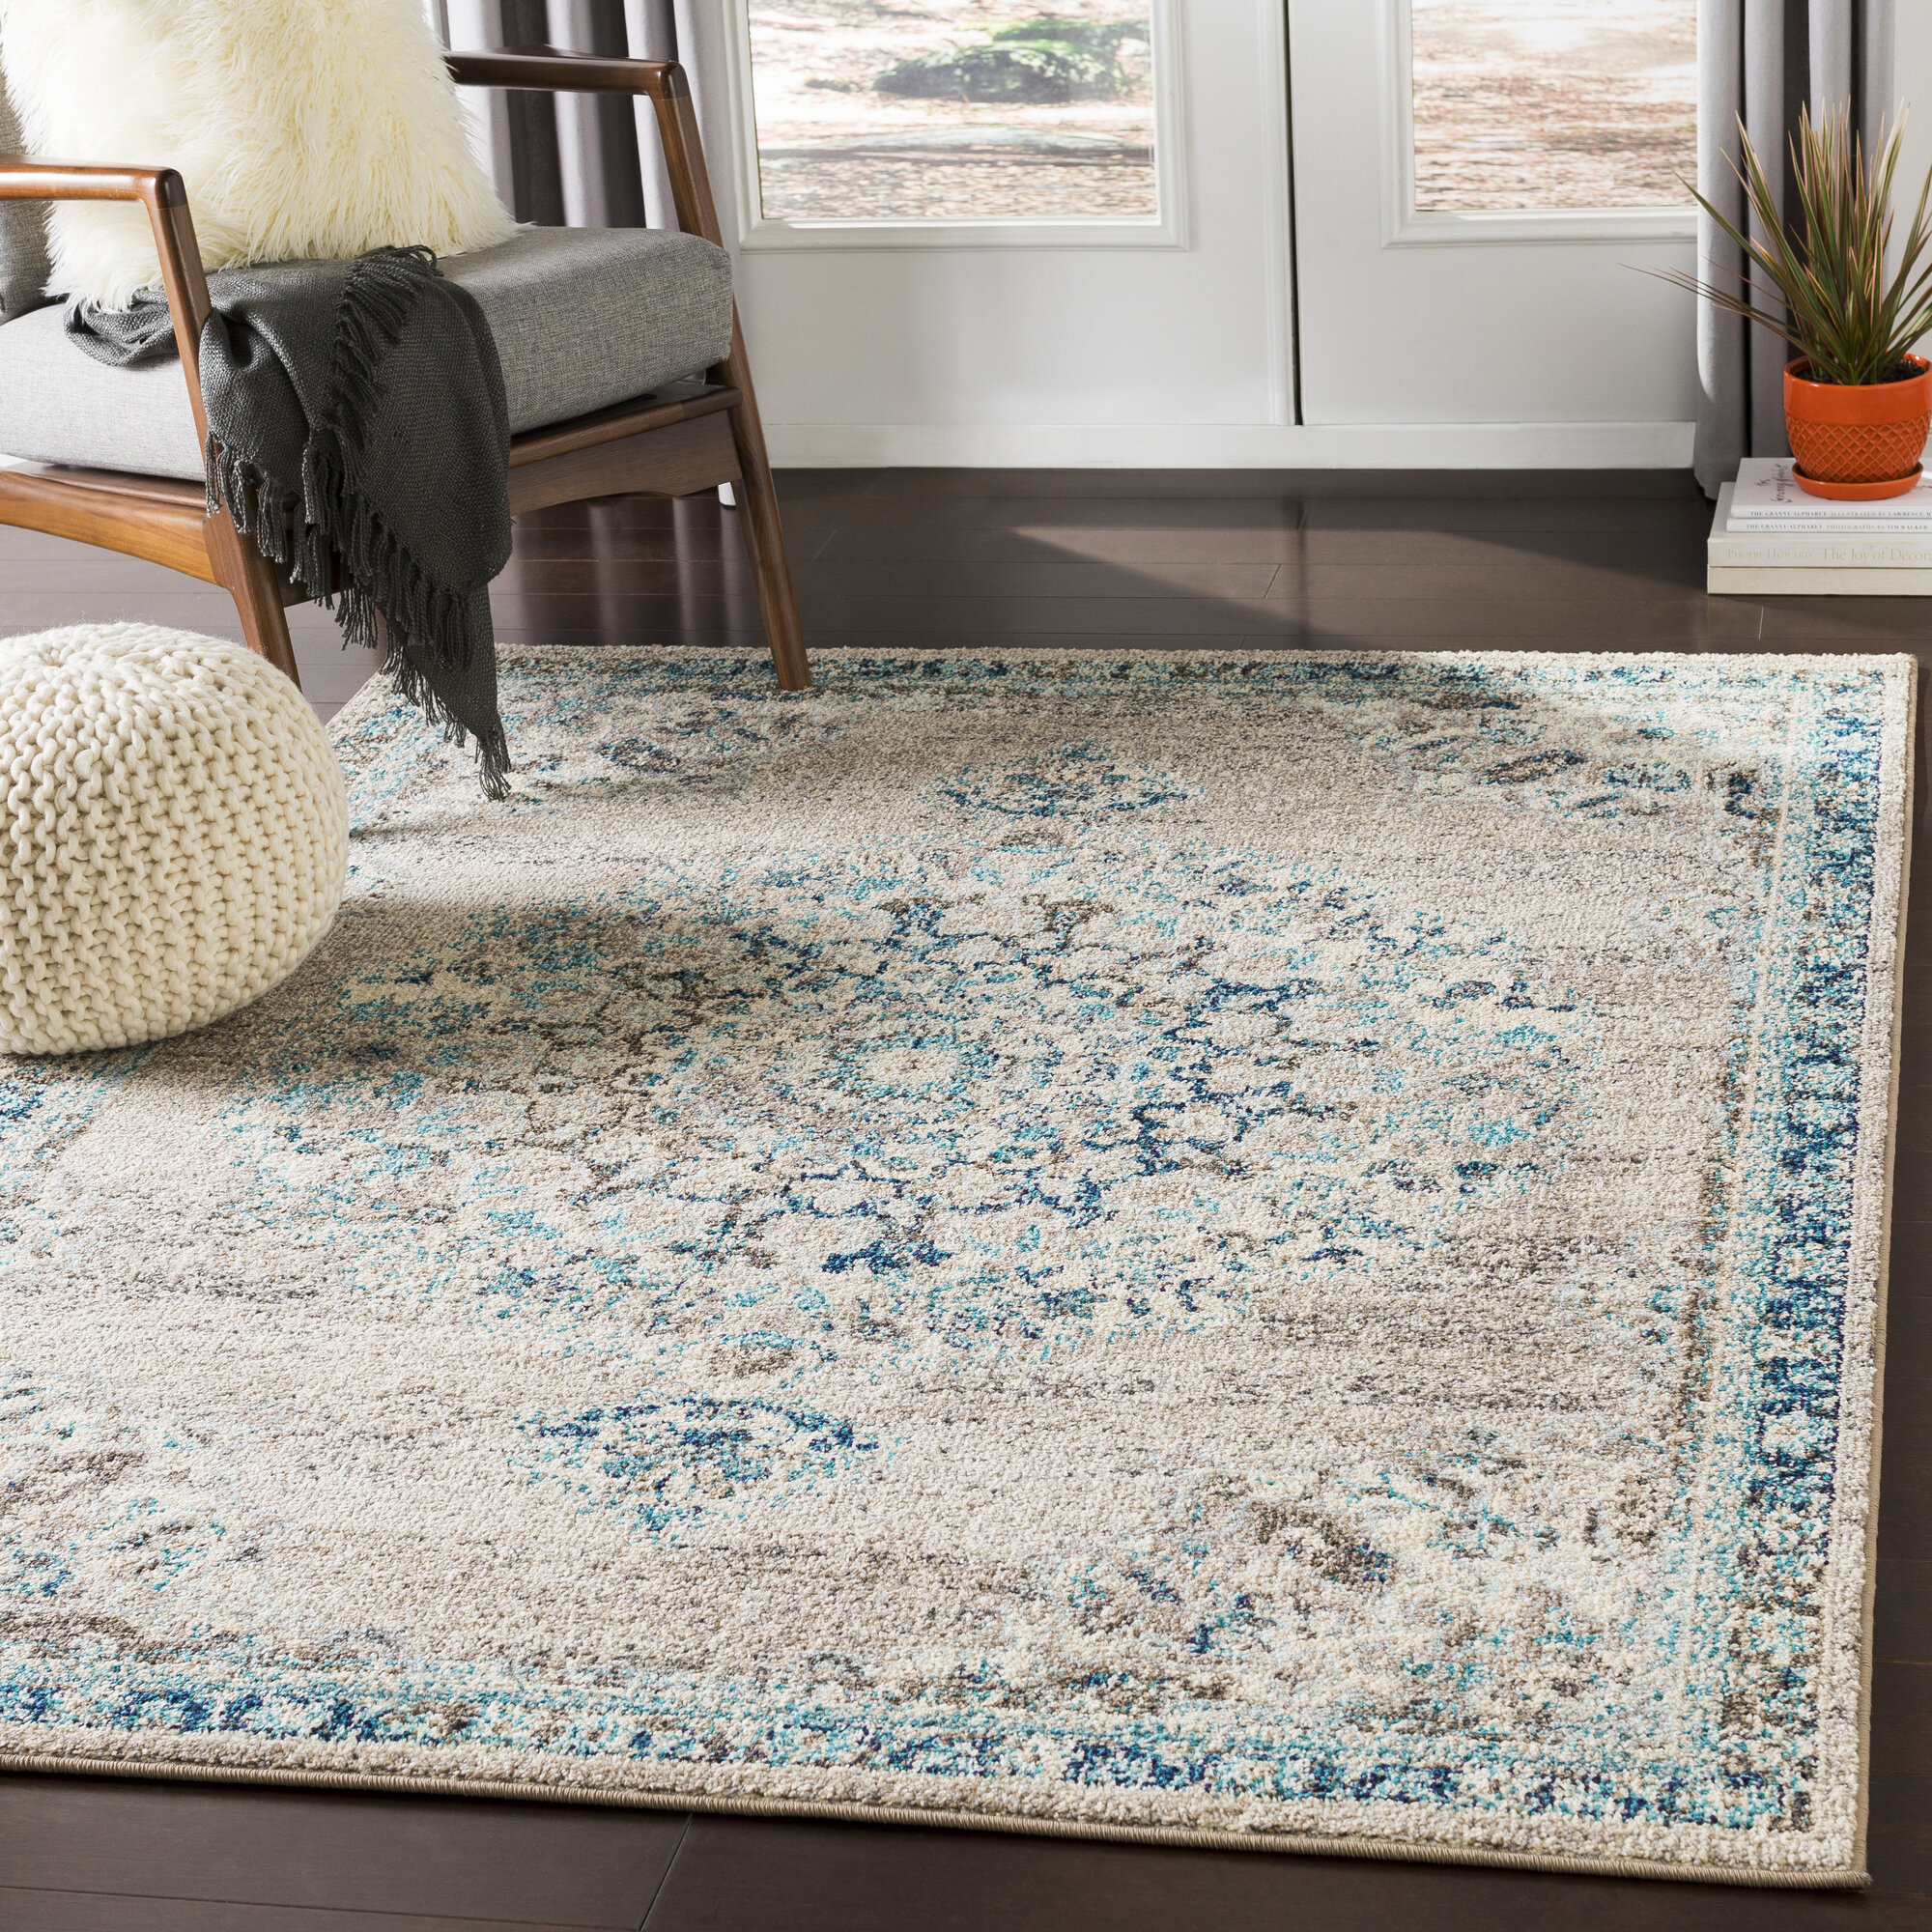 Oriental Bungalow Rose Area Rugs You'll Love